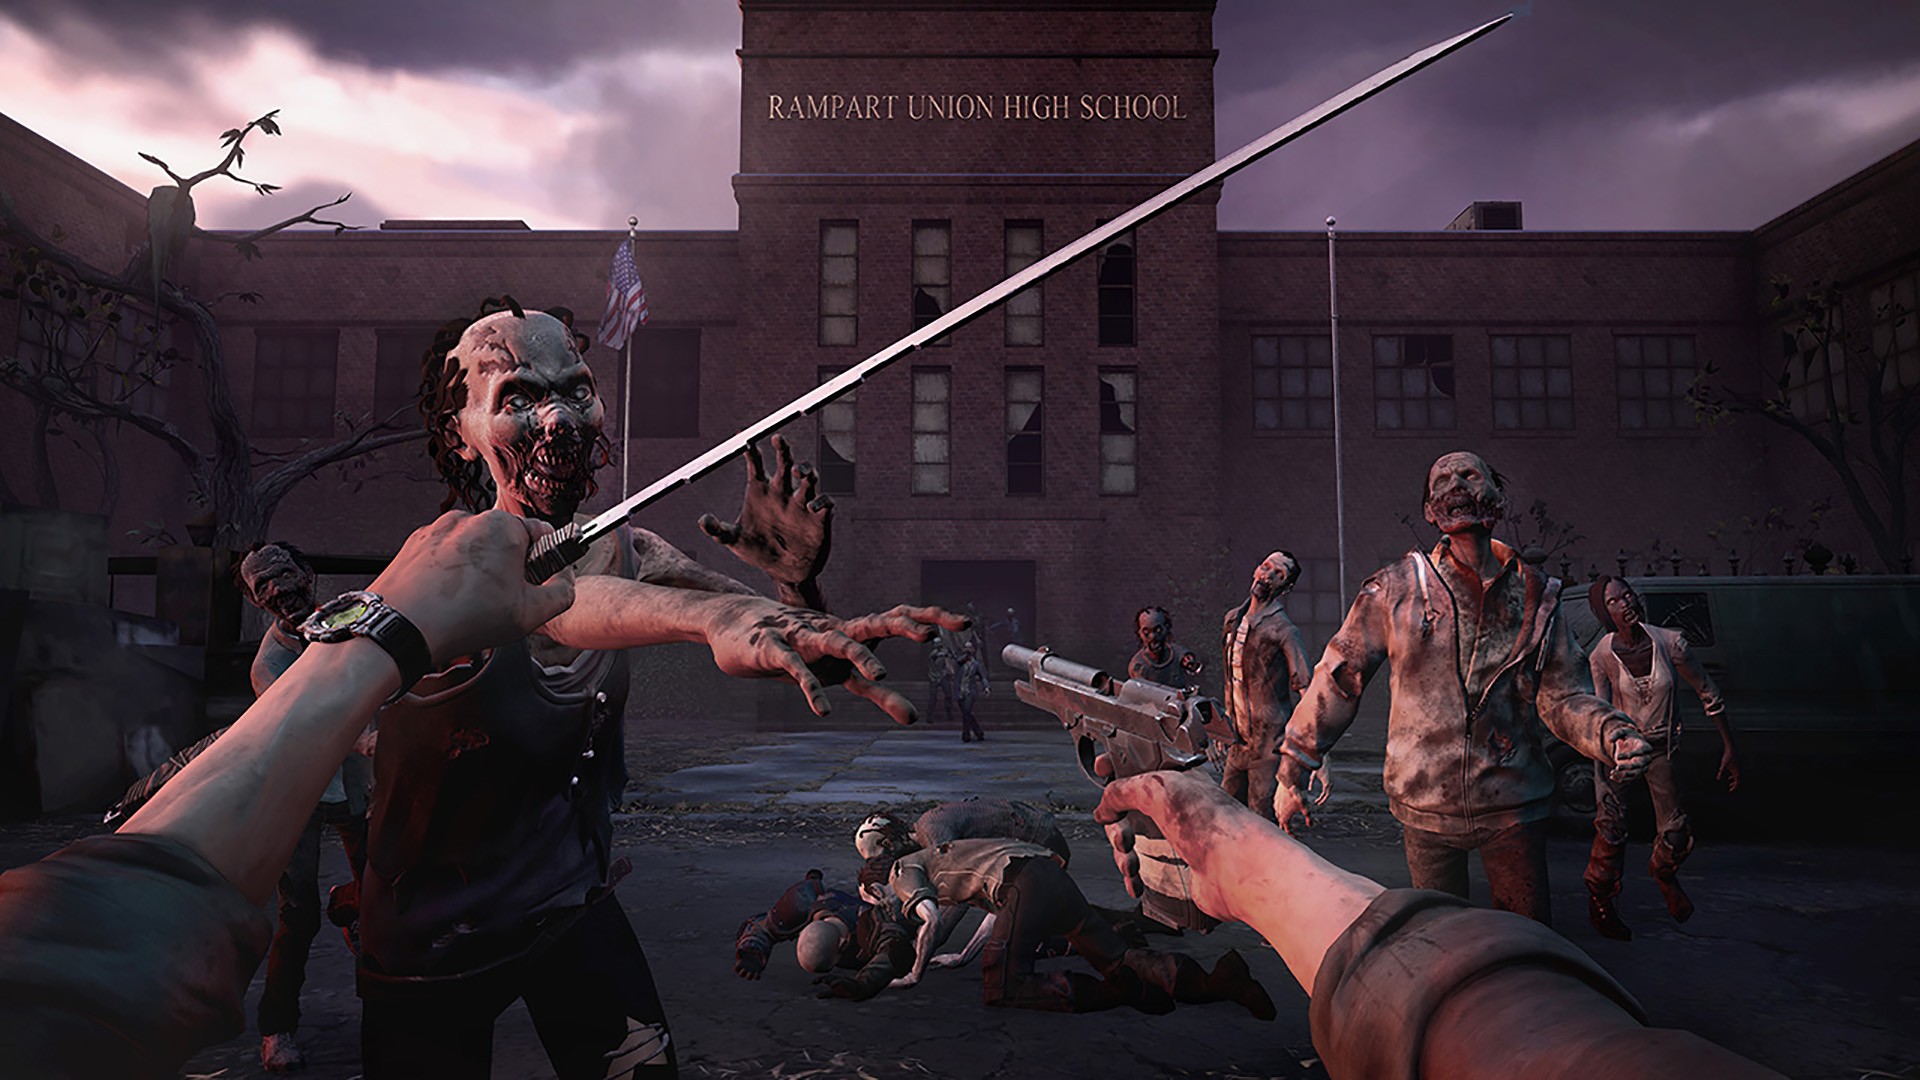 walking dead saints and sinners psvr review